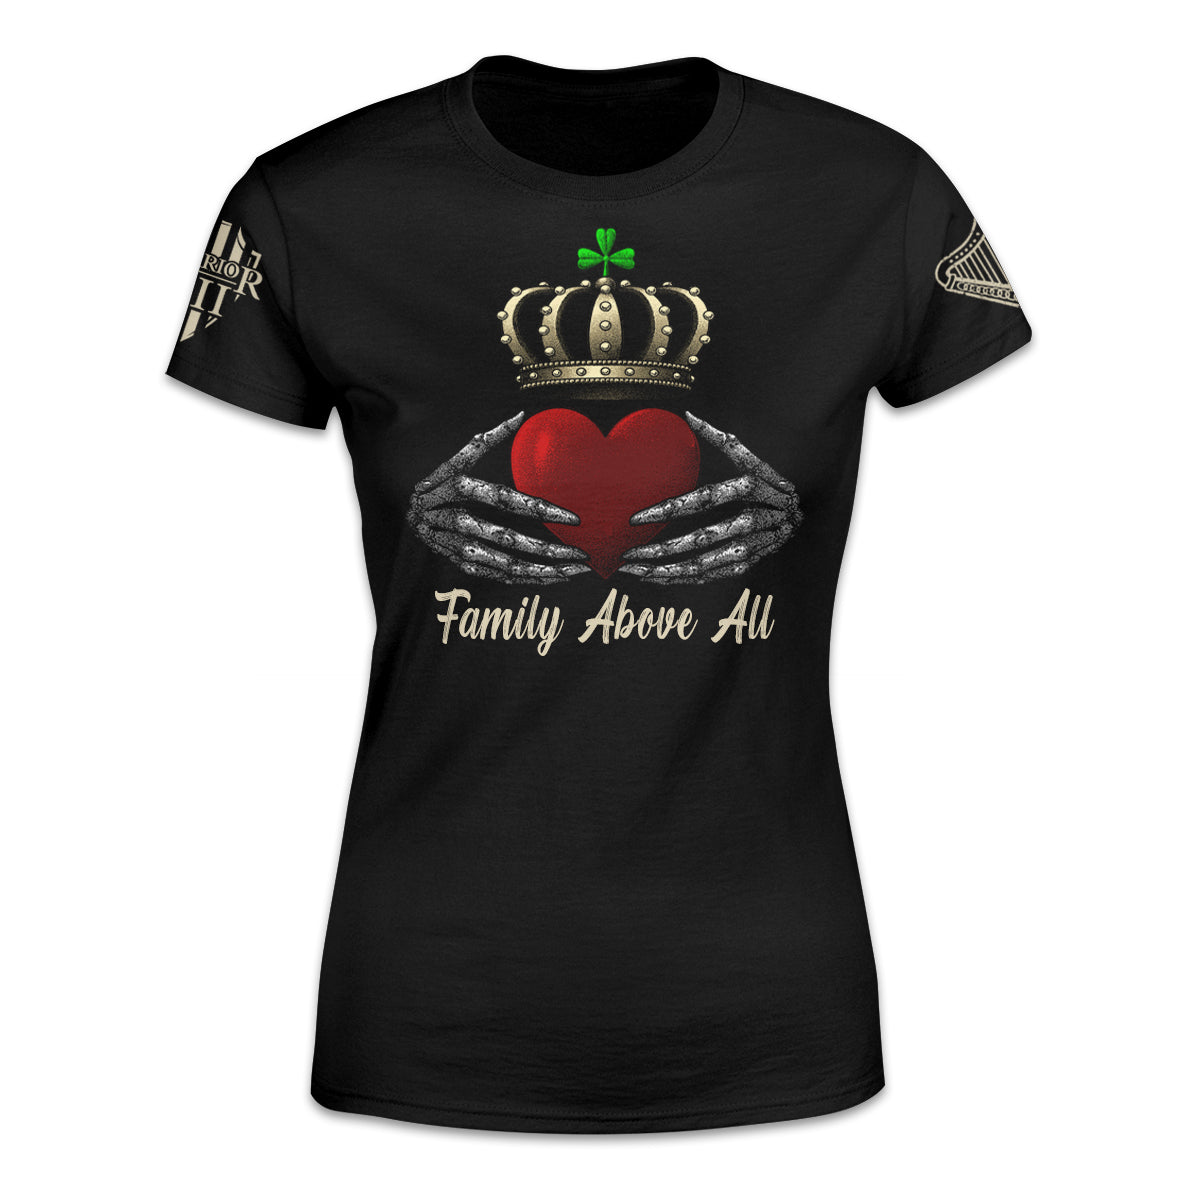 A black women's t-shirt featuring a Claddagh on the front with skeletal hands, and the words "Family Above All."